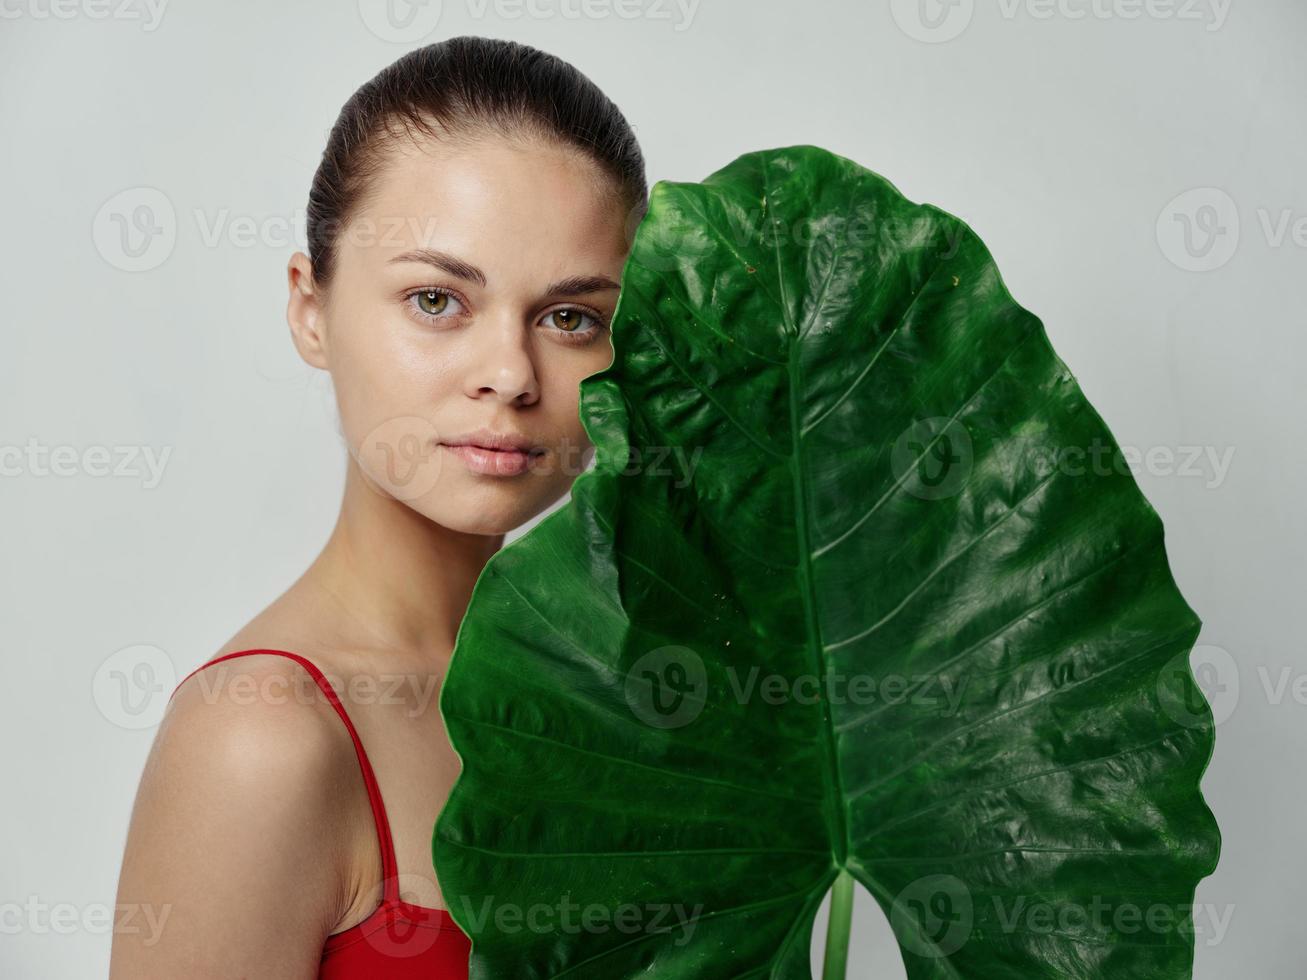 a woman in a red t-shirt on a light background holds a green leaf in her hands field natural look photo